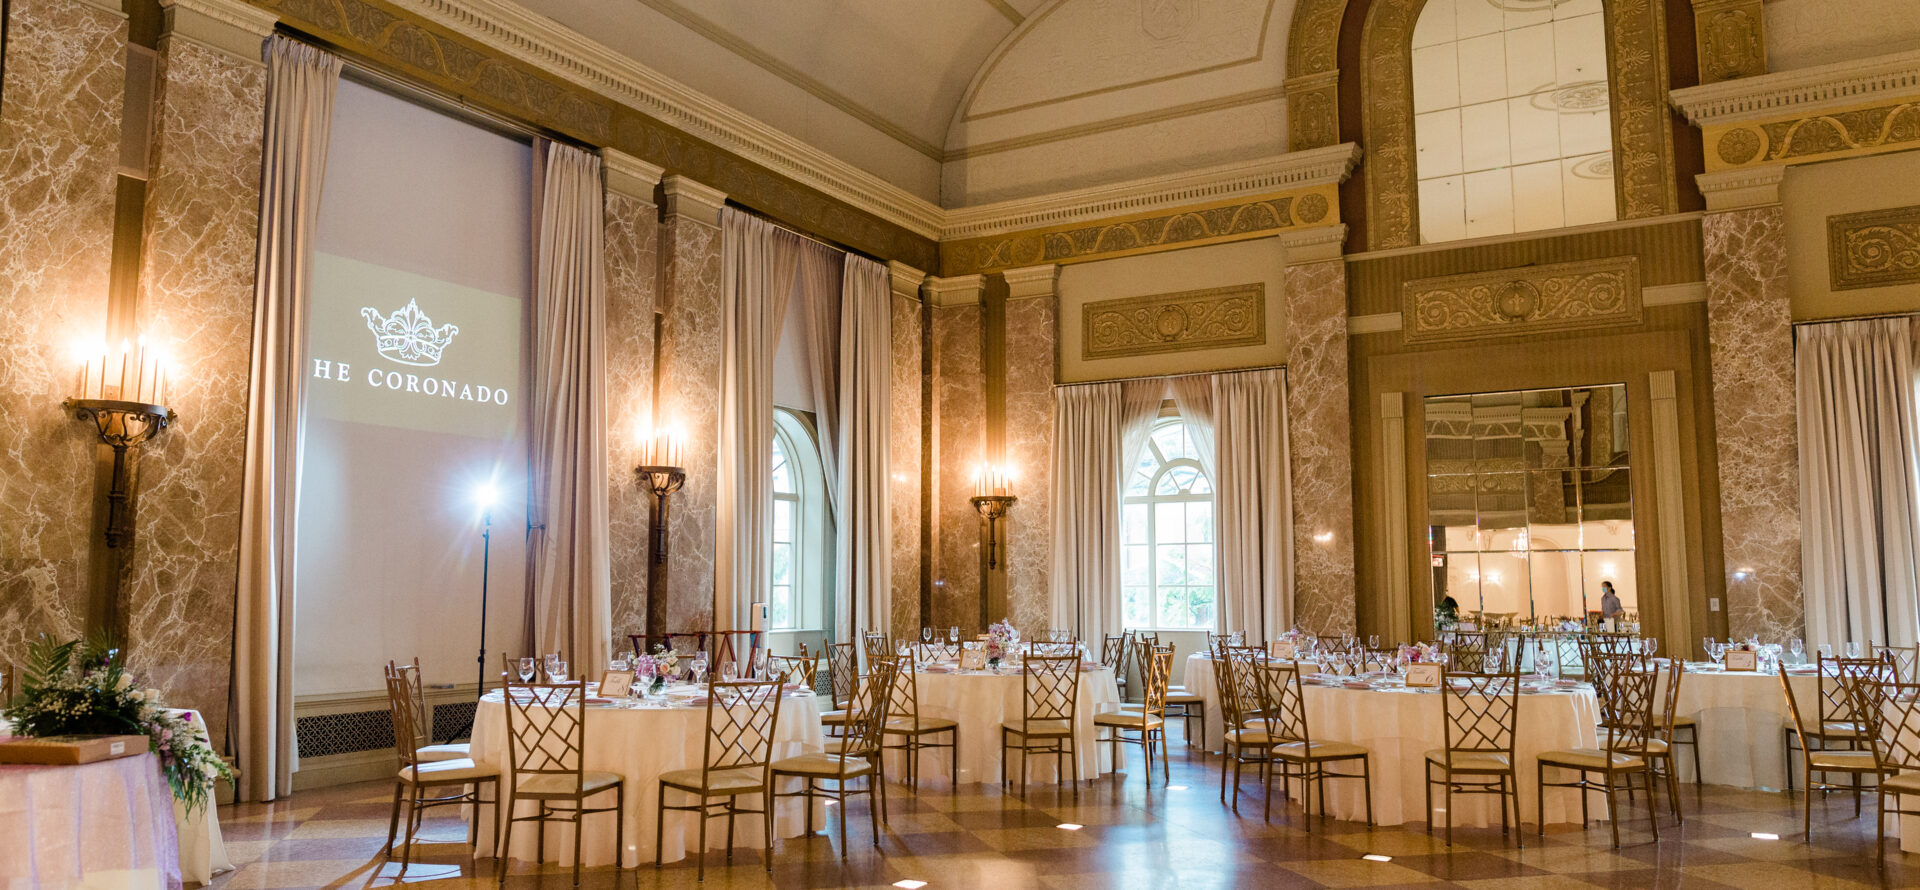 Golden ballroom with high, arched ceilings and tables